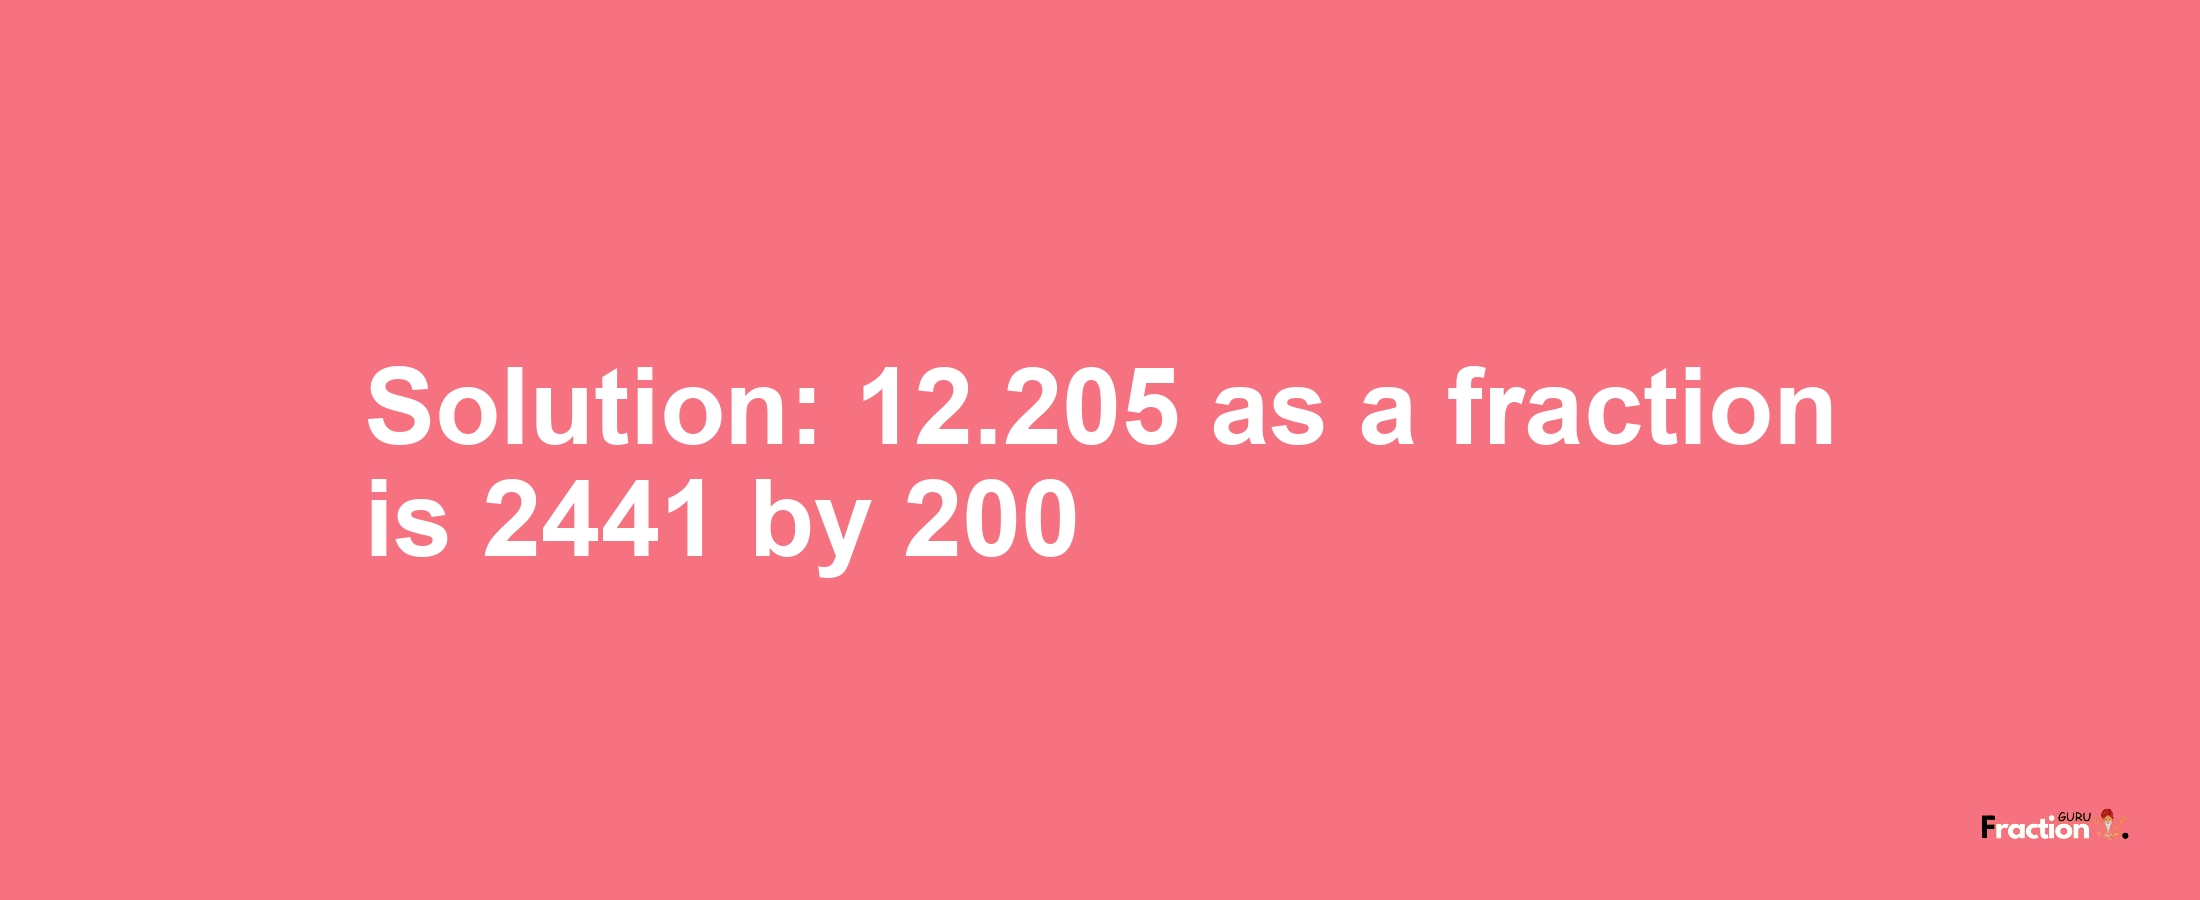 Solution:12.205 as a fraction is 2441/200